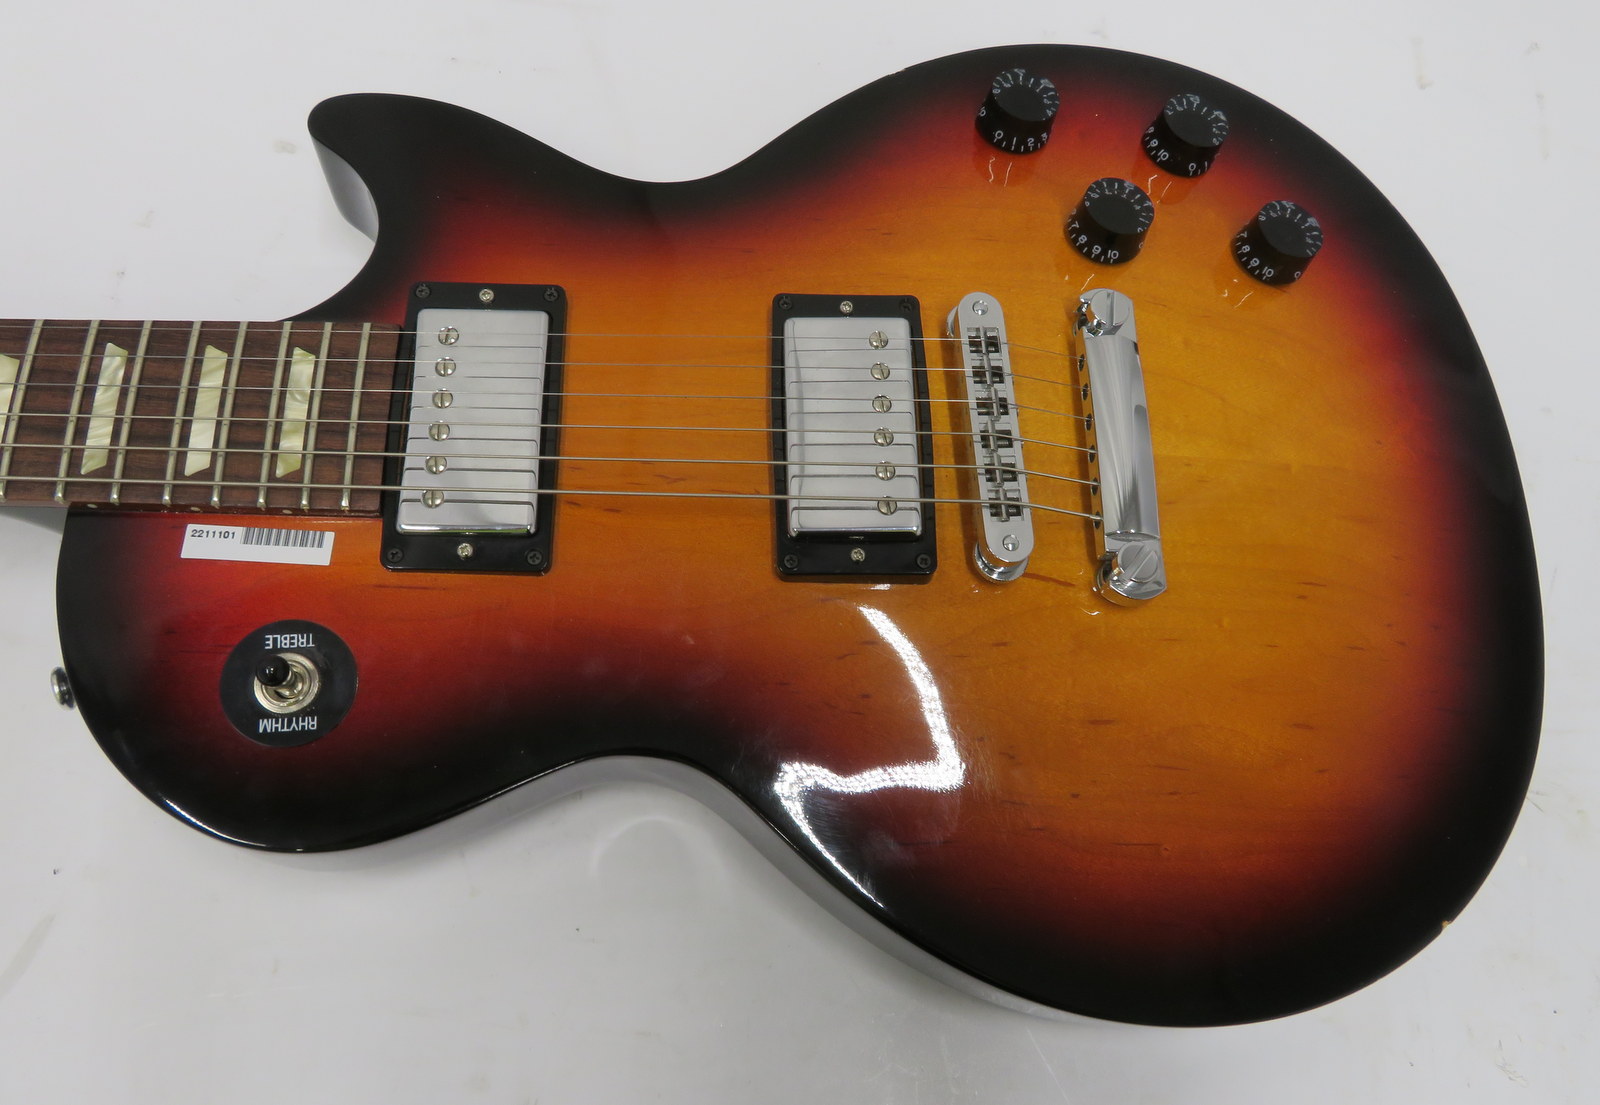 Gibson Les Paul electric guitar in flight case. Serial number: 124200693. - Image 4 of 13